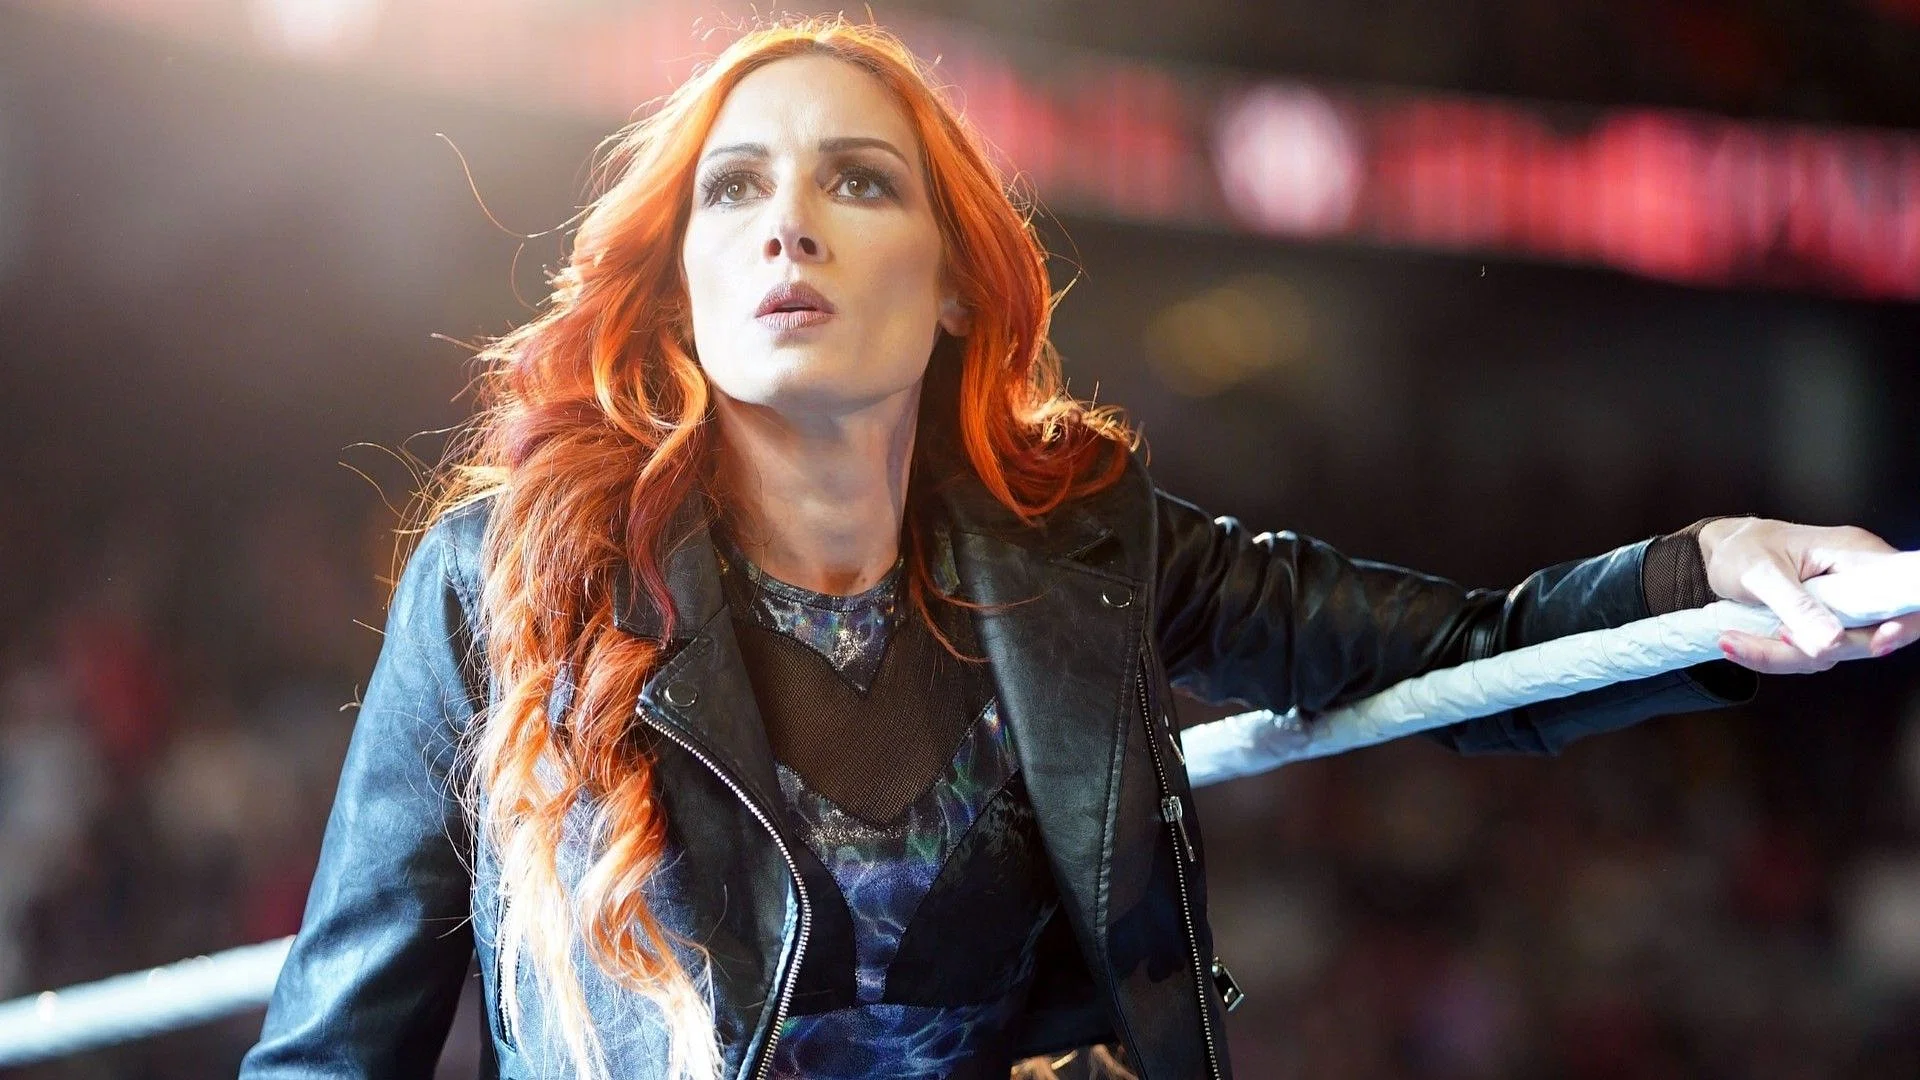 Becky Lynch Expresses Strong Disapproval of Allegations Against Vince McMahon